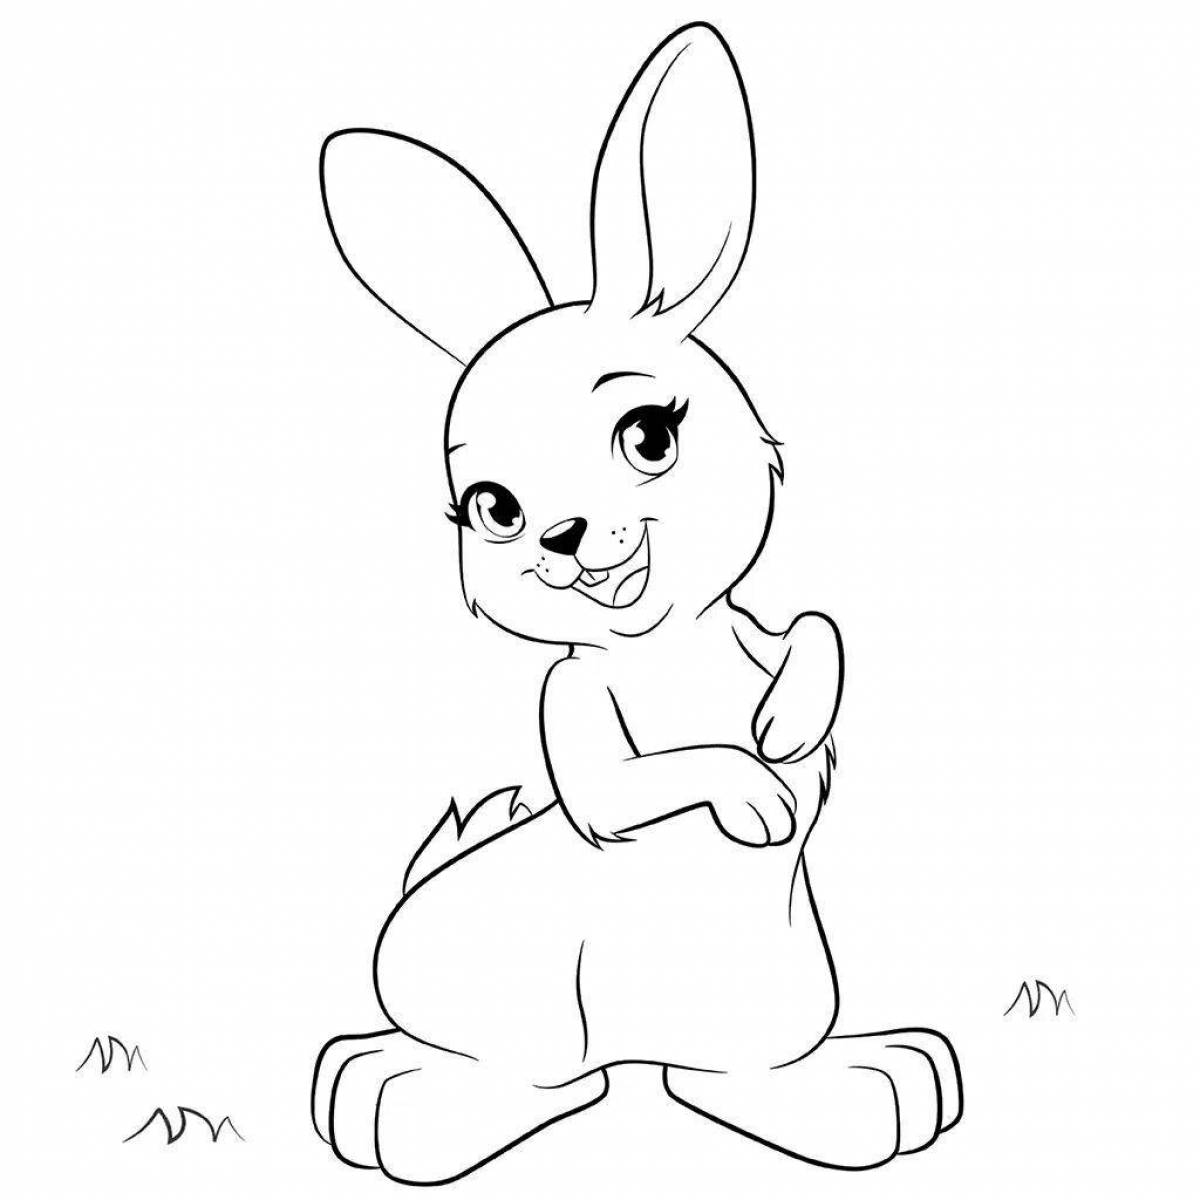 Cute bunny coloring book for 2-3 year olds